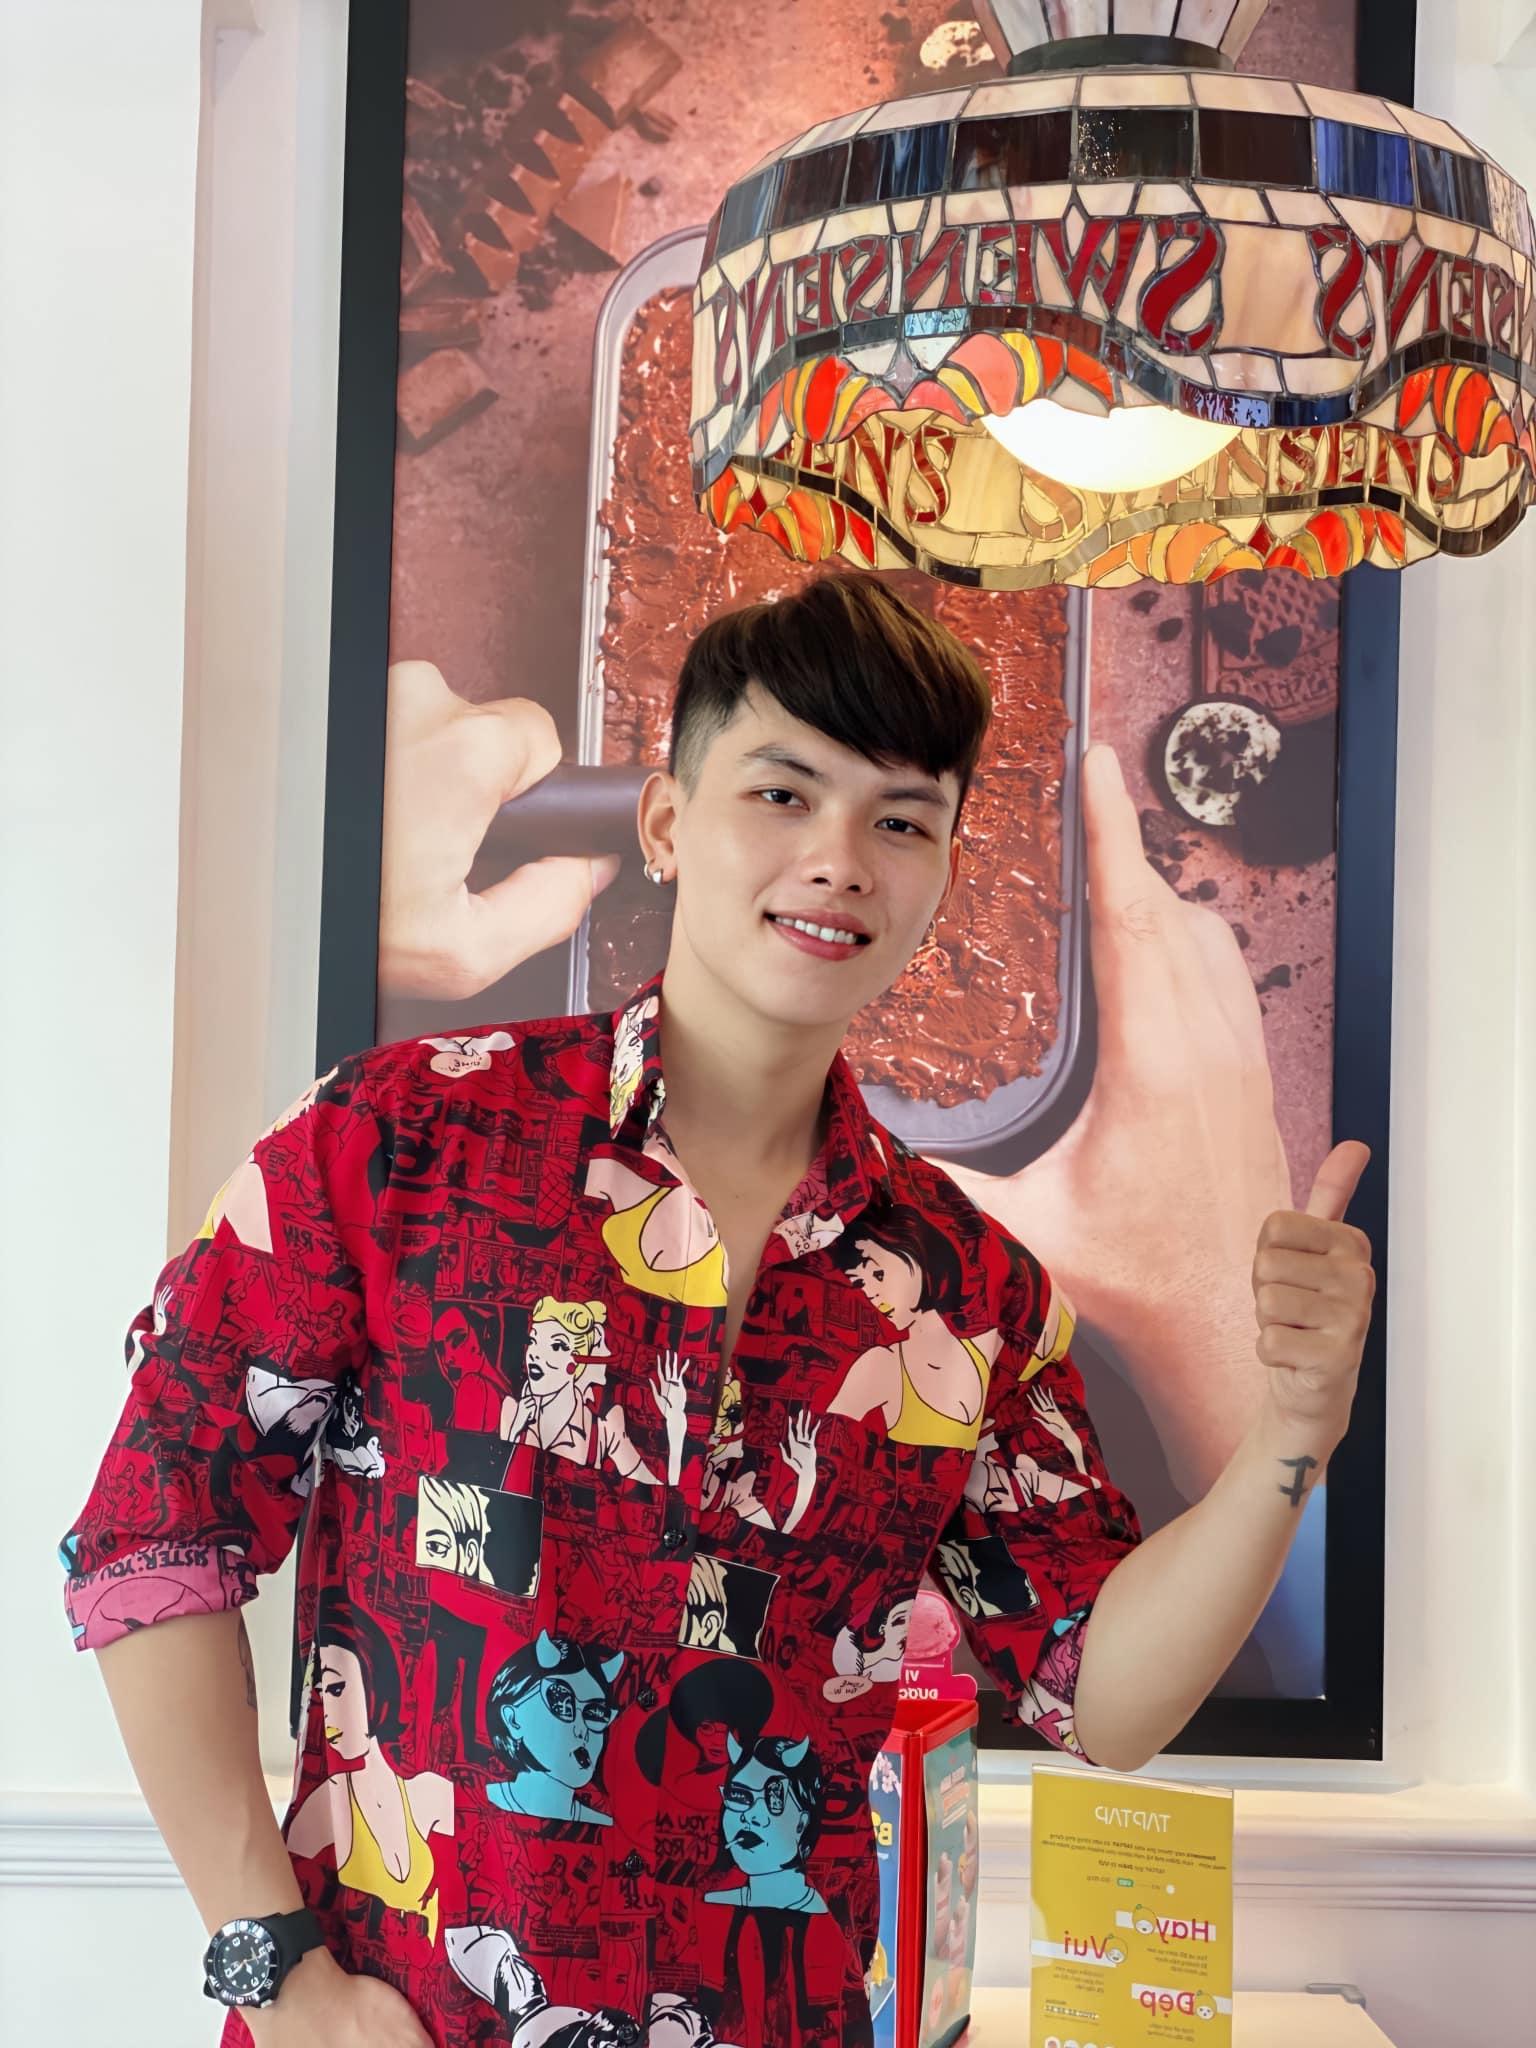  Tran Tuan Anh's image is outstandingly handsome